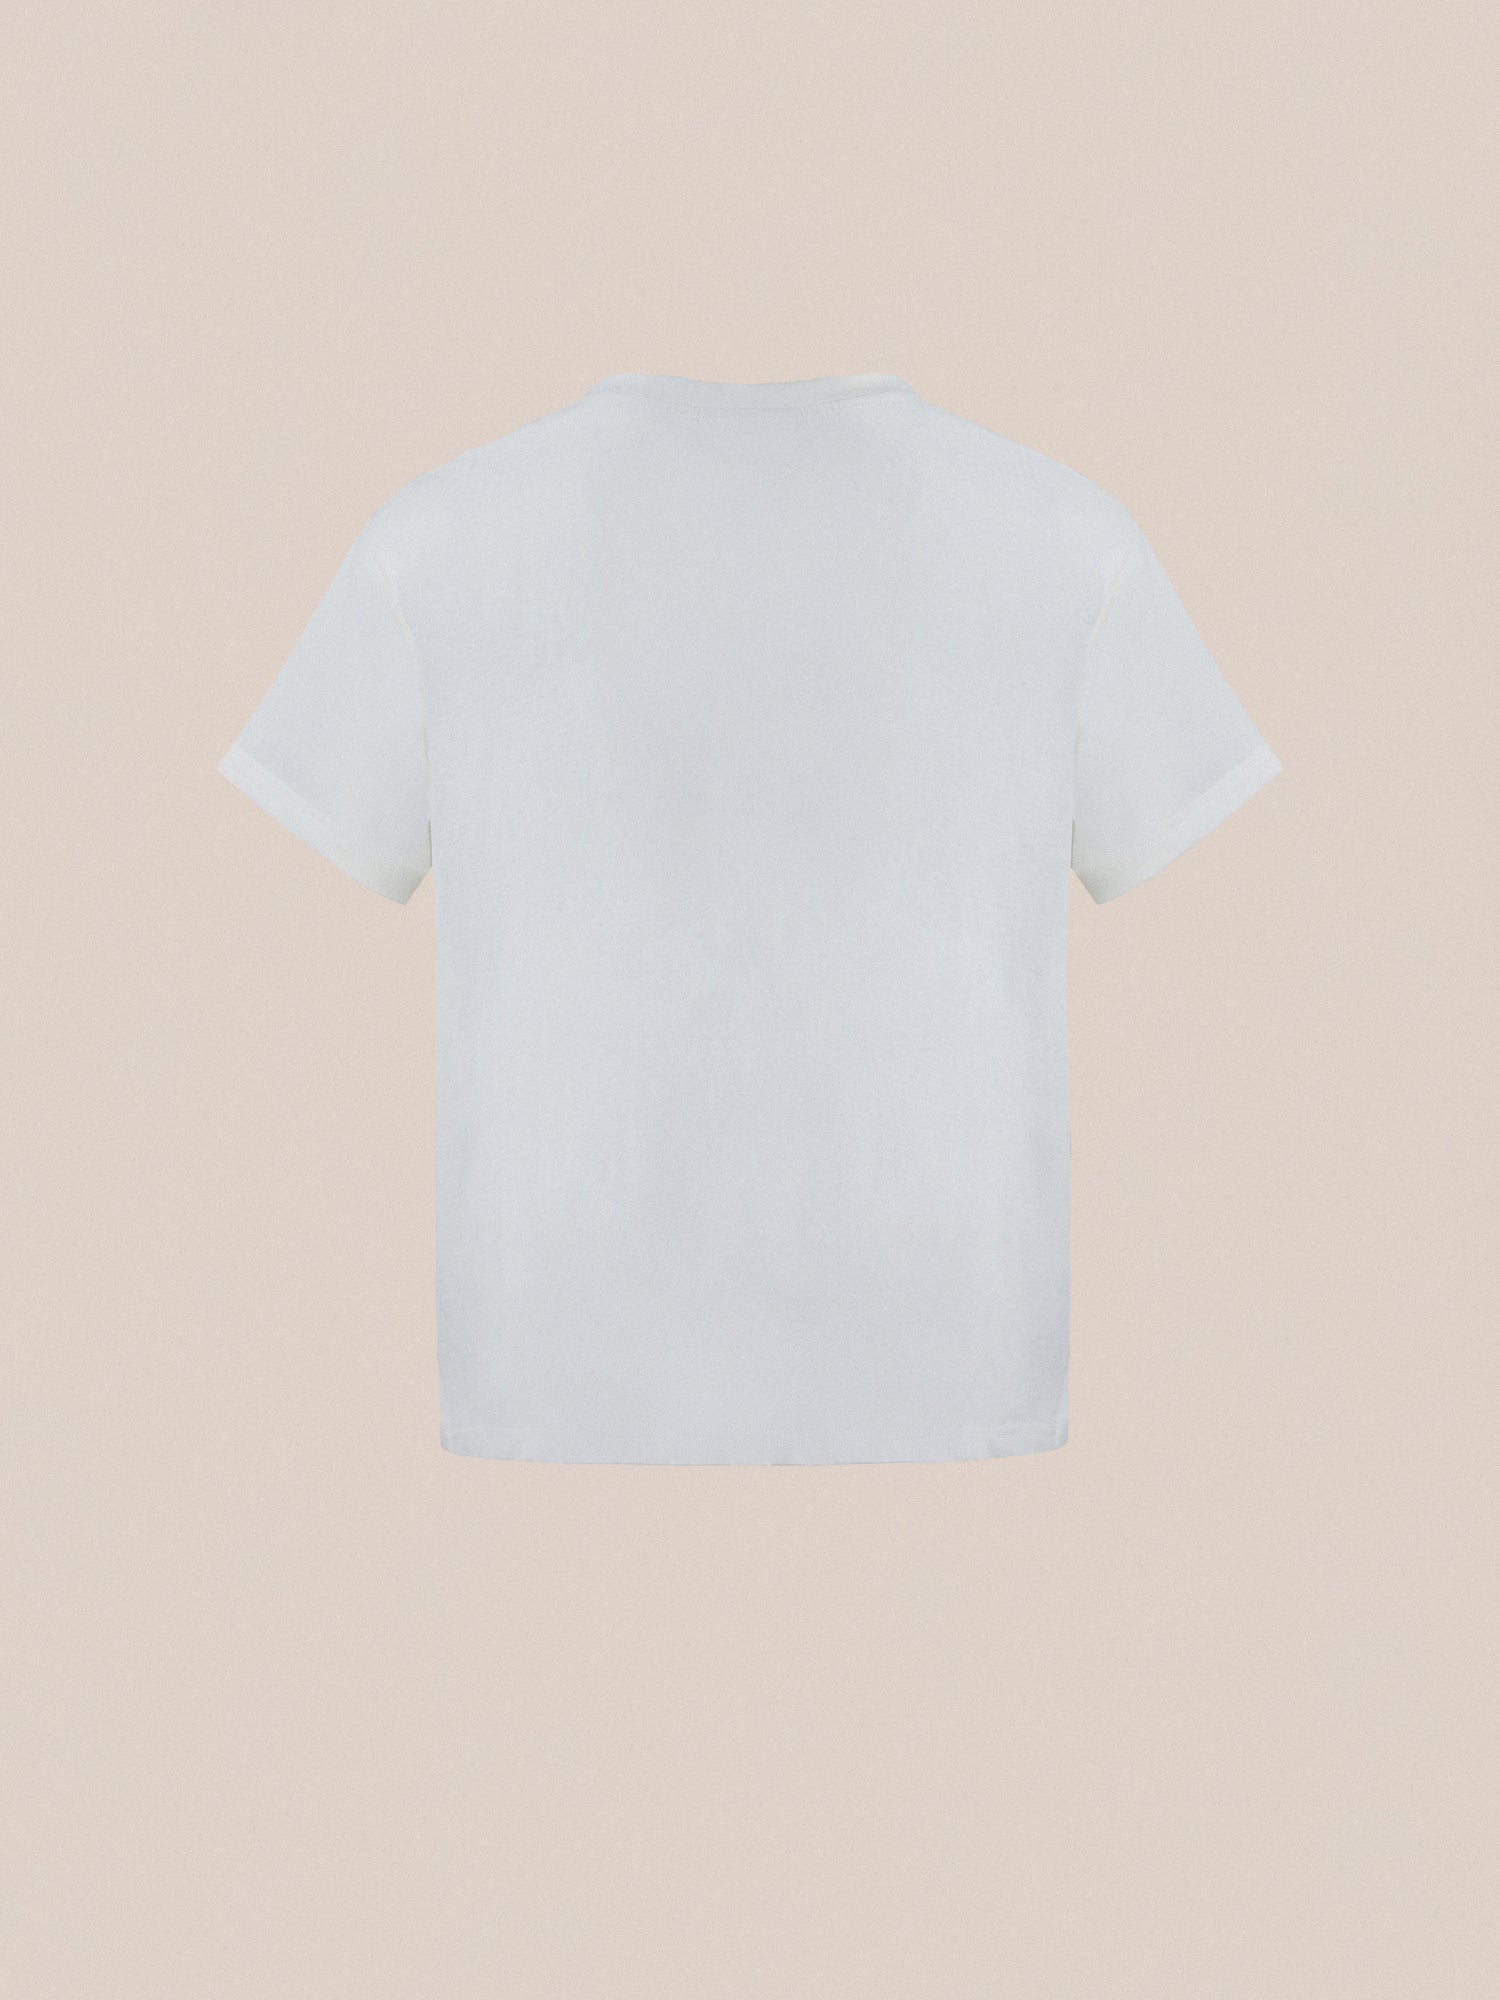 A Found Flower Pot Tee on a white background.